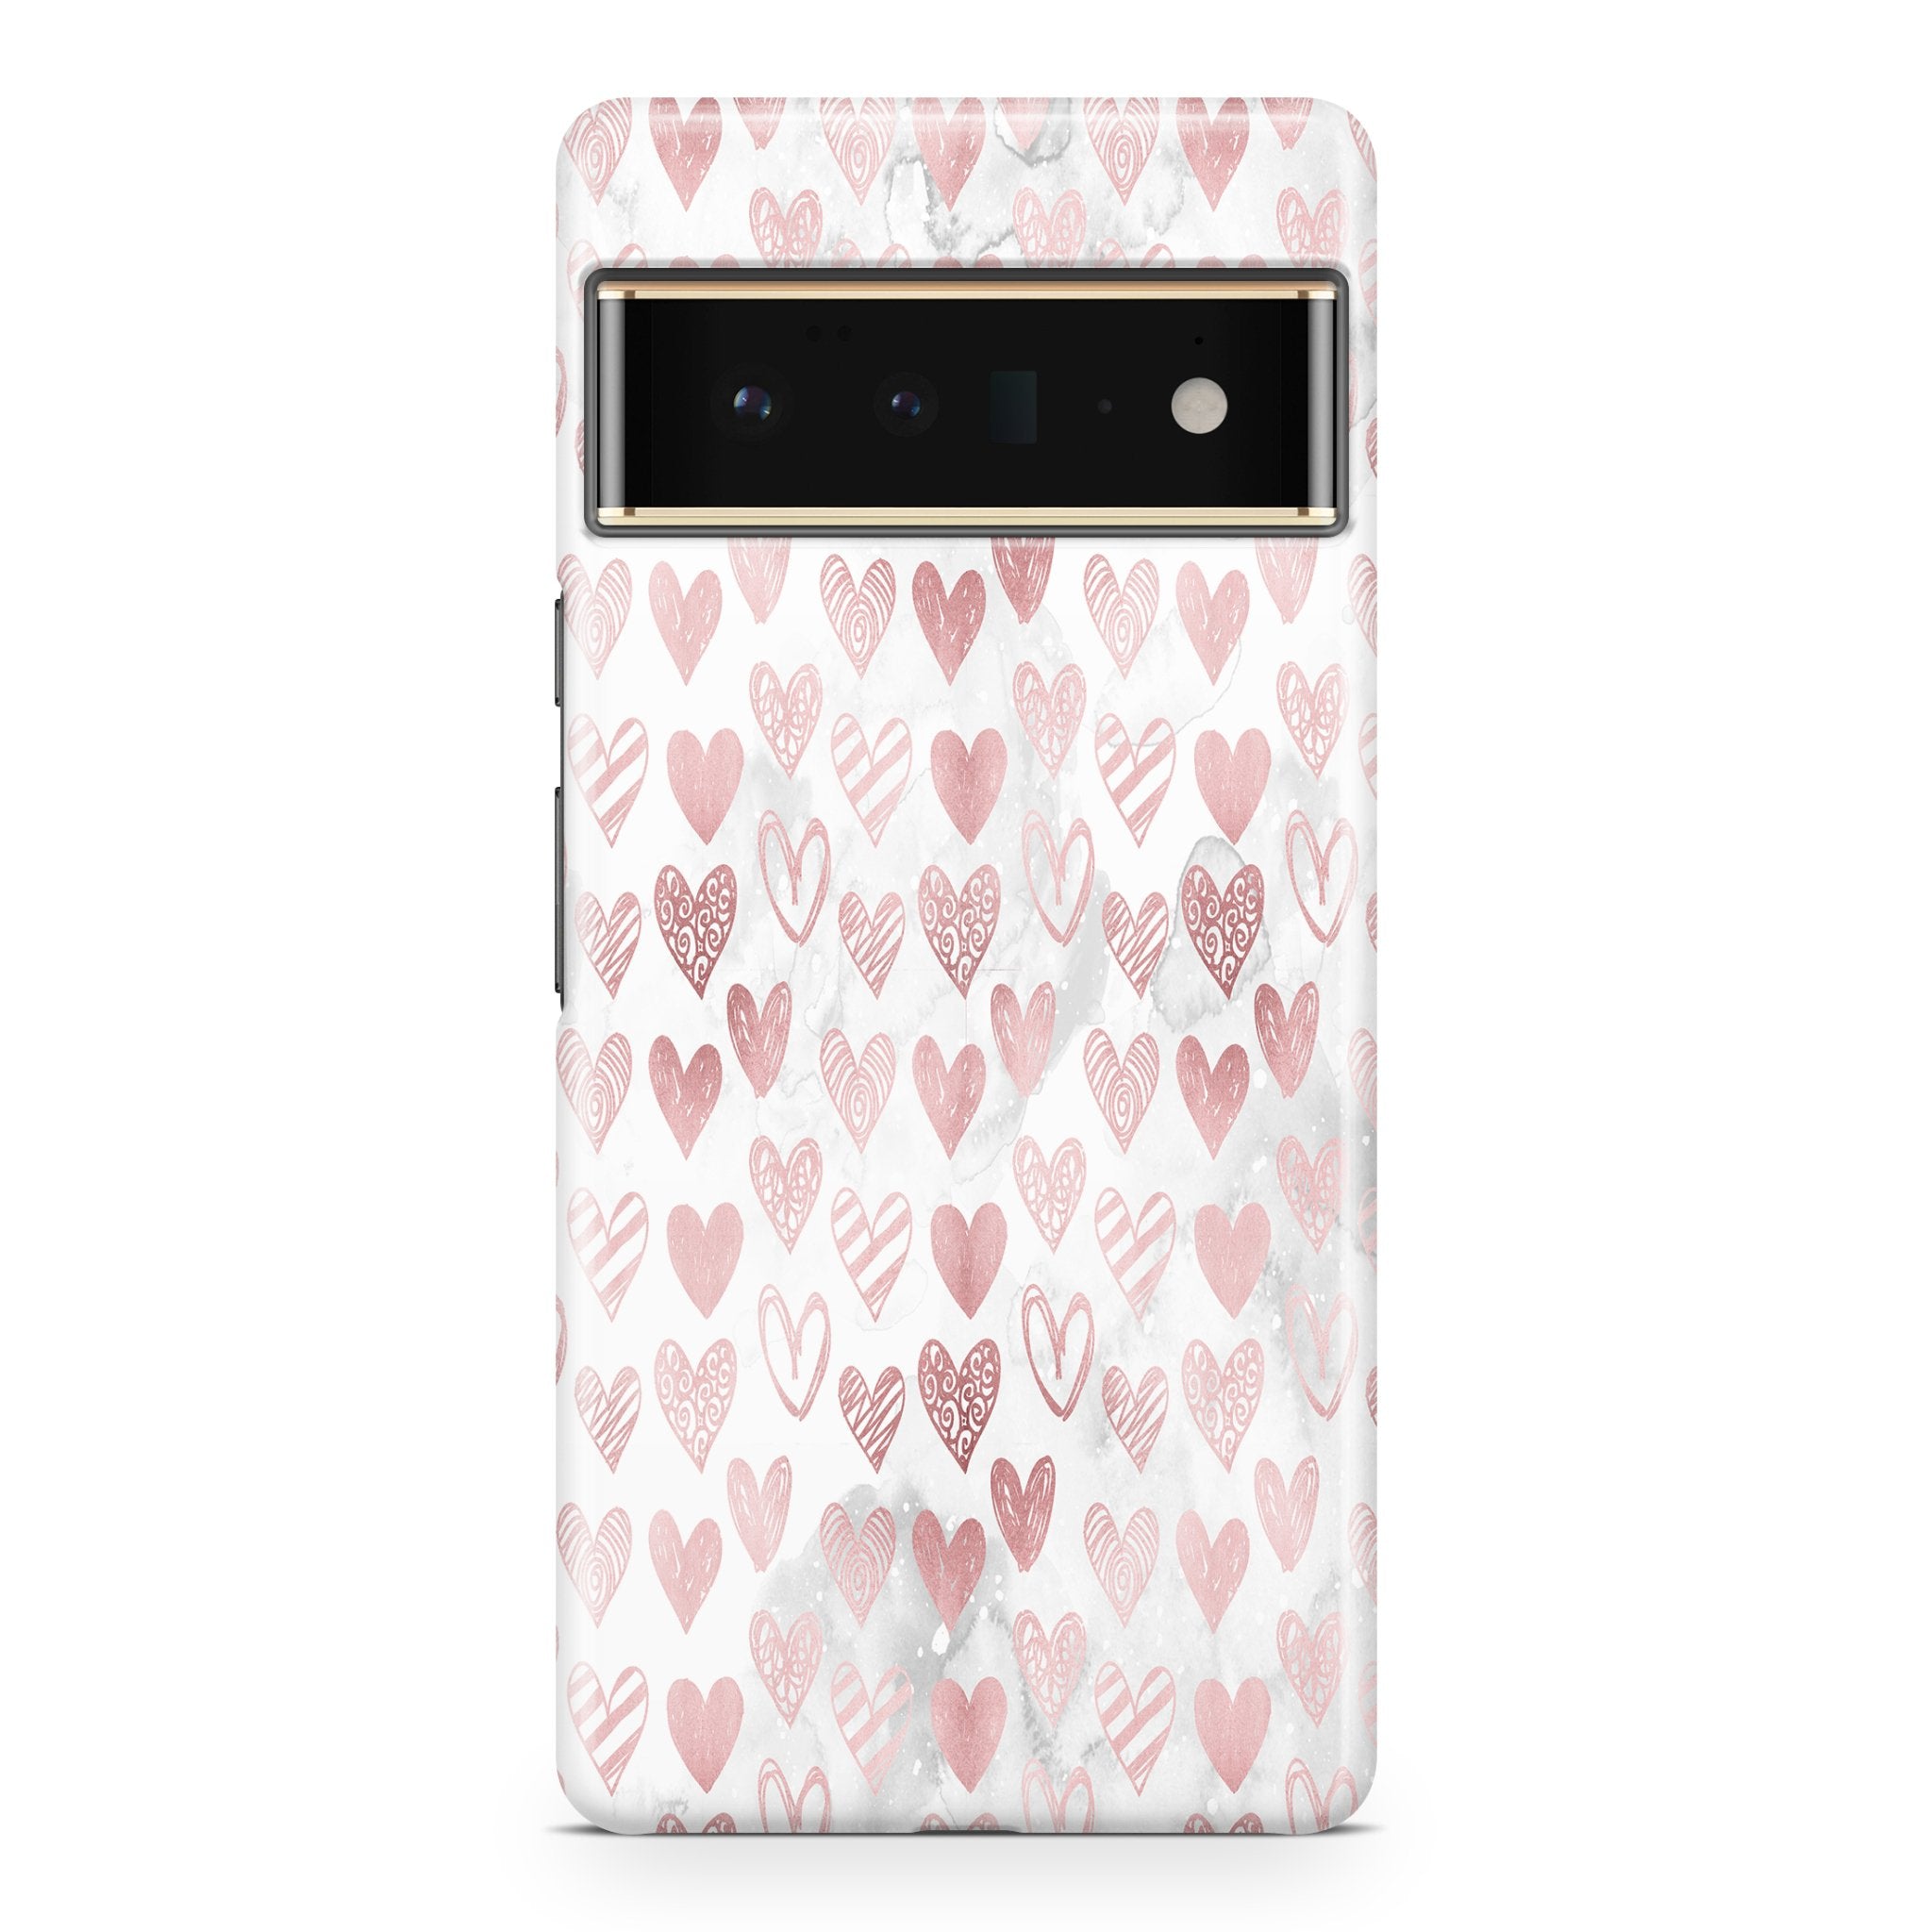 Pink Heart - Google phone case designs by CaseSwagger